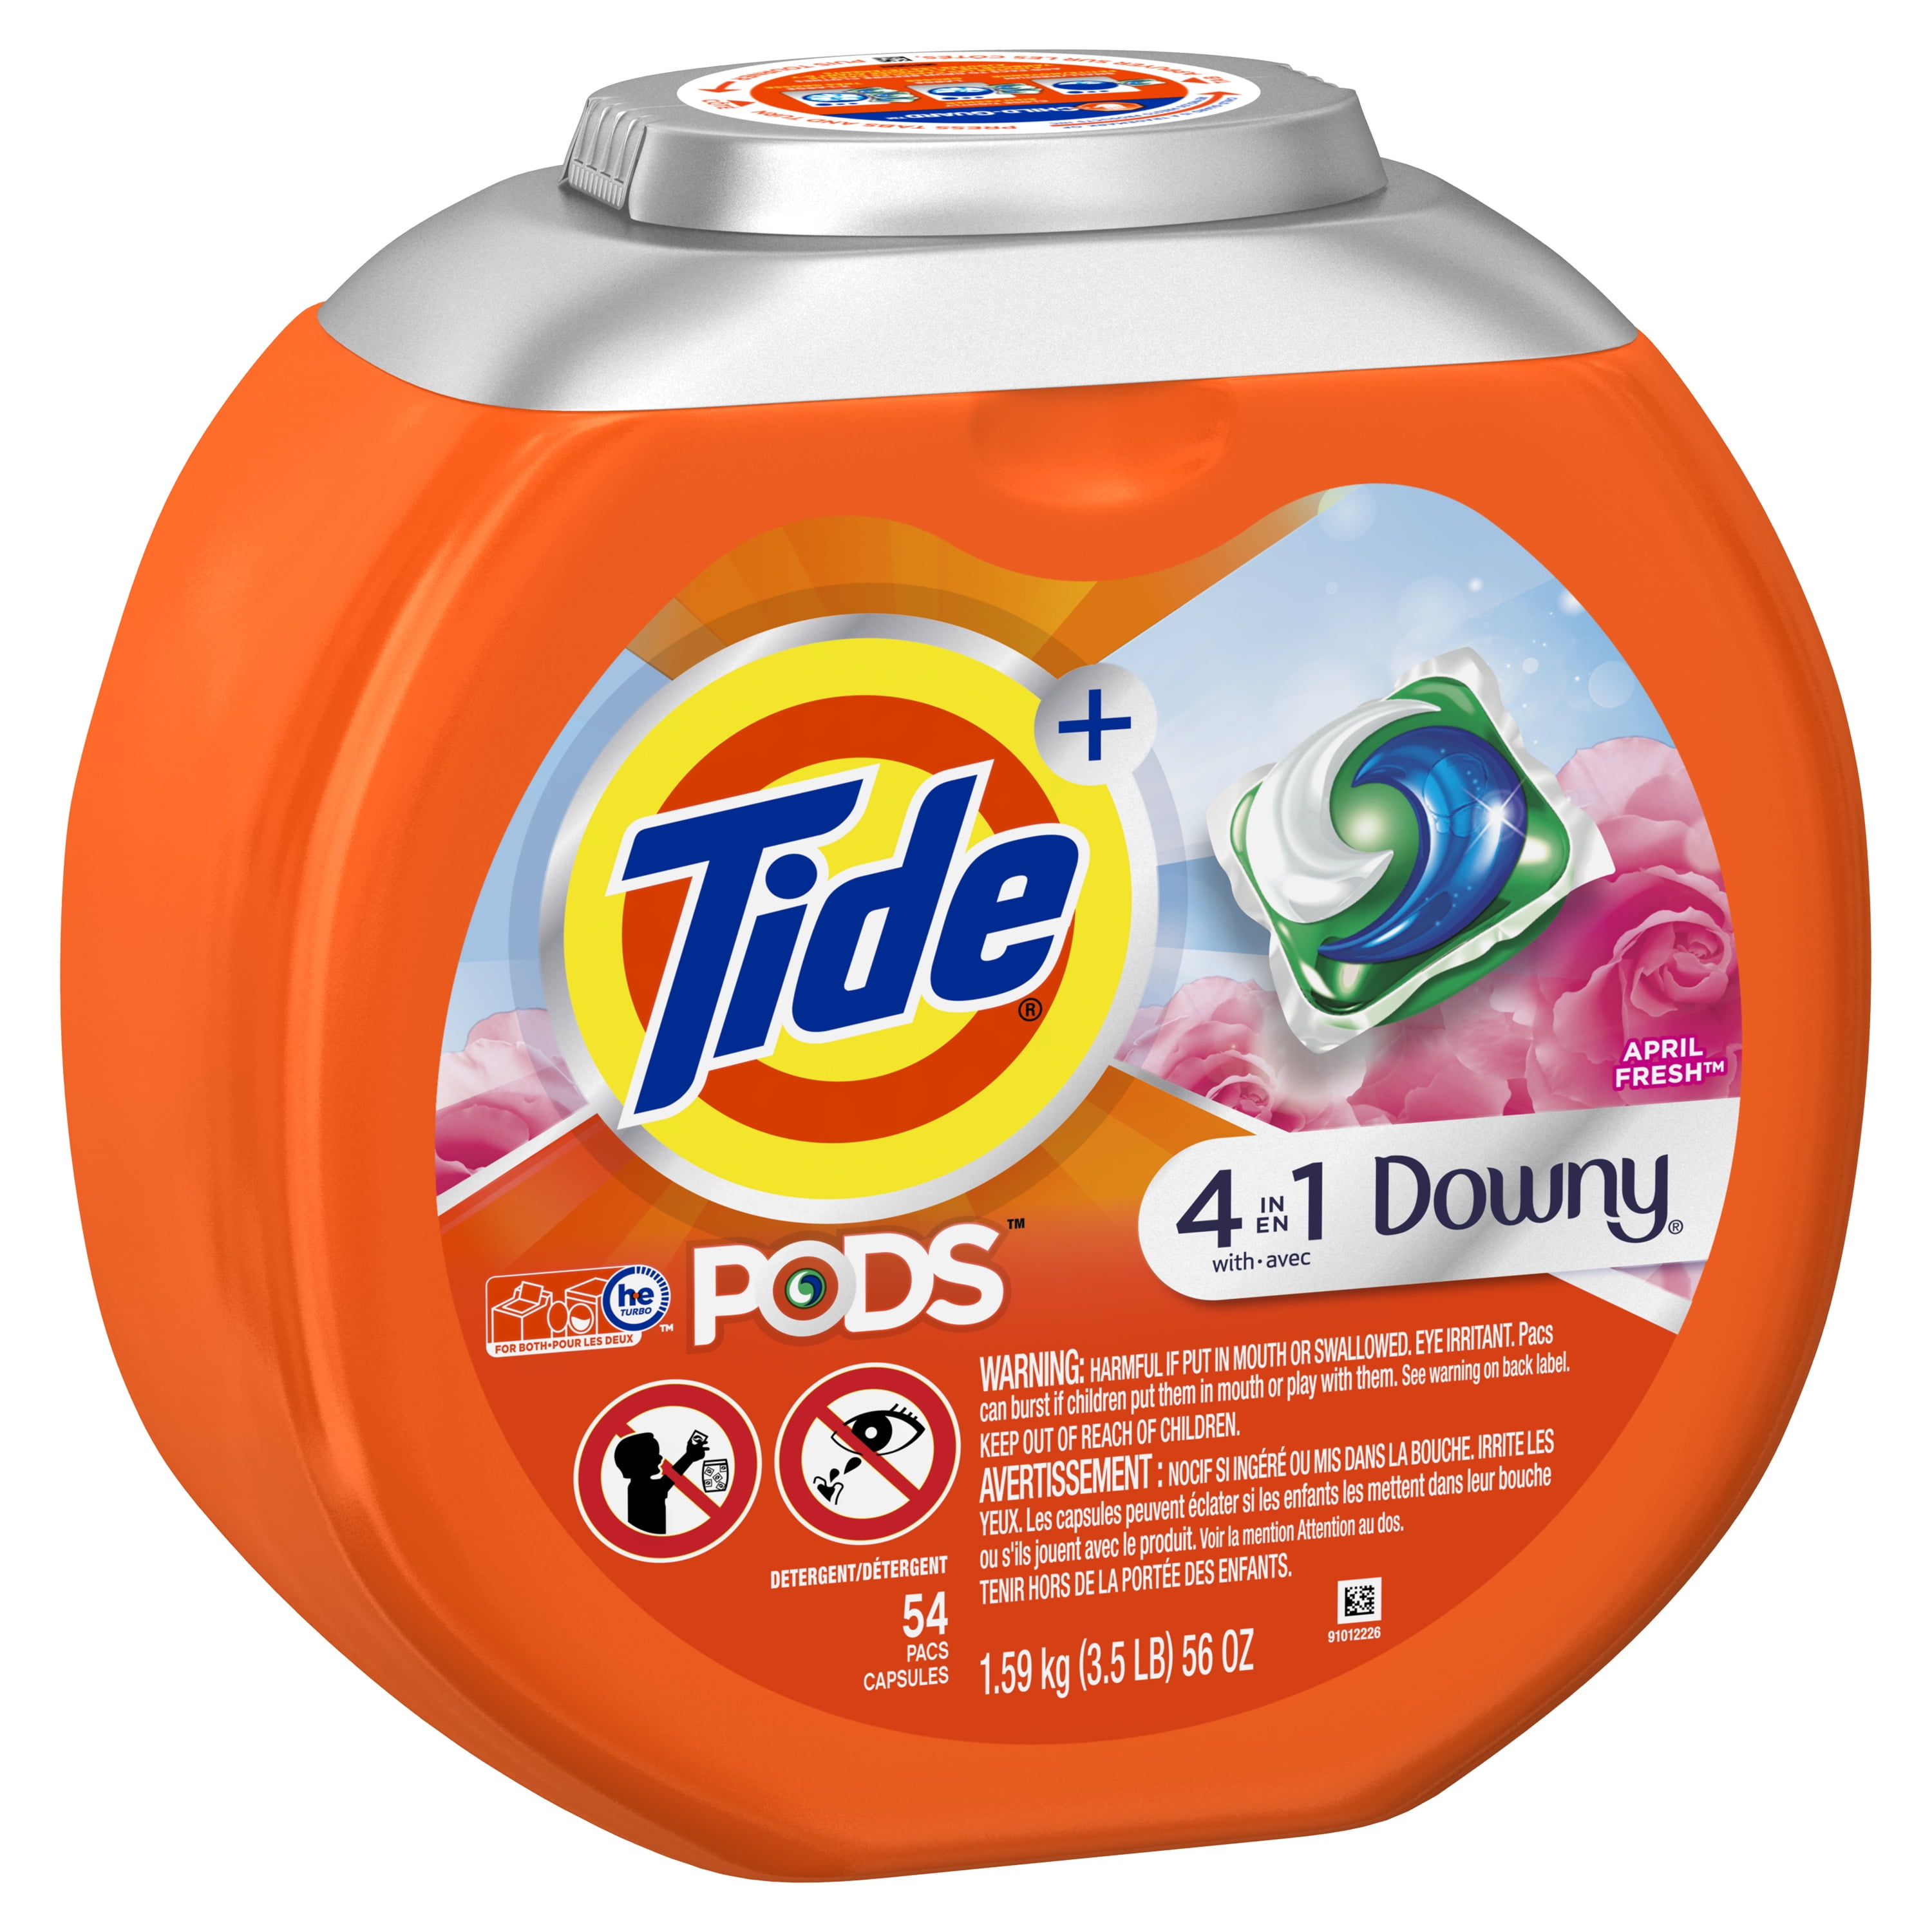 Tide PODS 4in1 Plus Downy April Fresh Scented